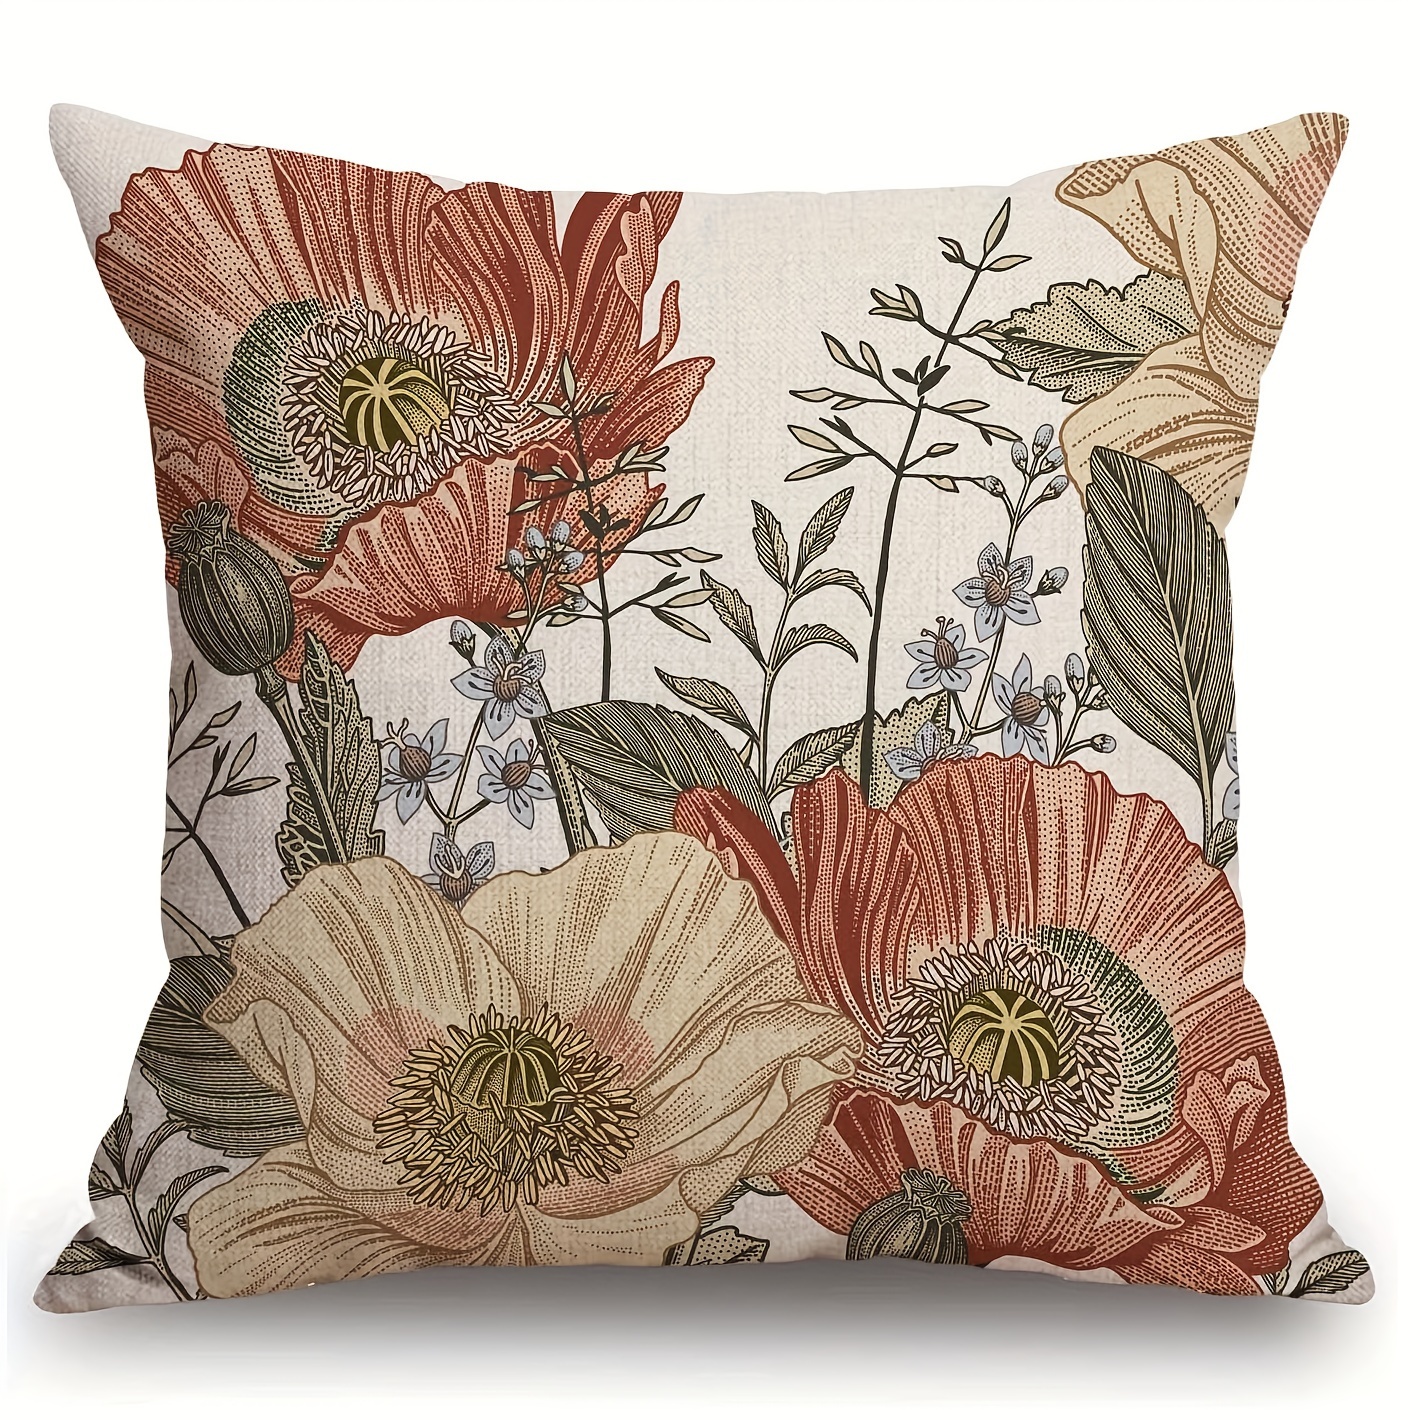 

1pc Soft Throw Pillow Covers, Vintage Garden Flowers Floral Rustic Home Decor Square Back Cushion Case Decorative Home Decor Fine Pillow Cover For Sofa Couch Bedroom Living Room Pillowcase (18×18inch)